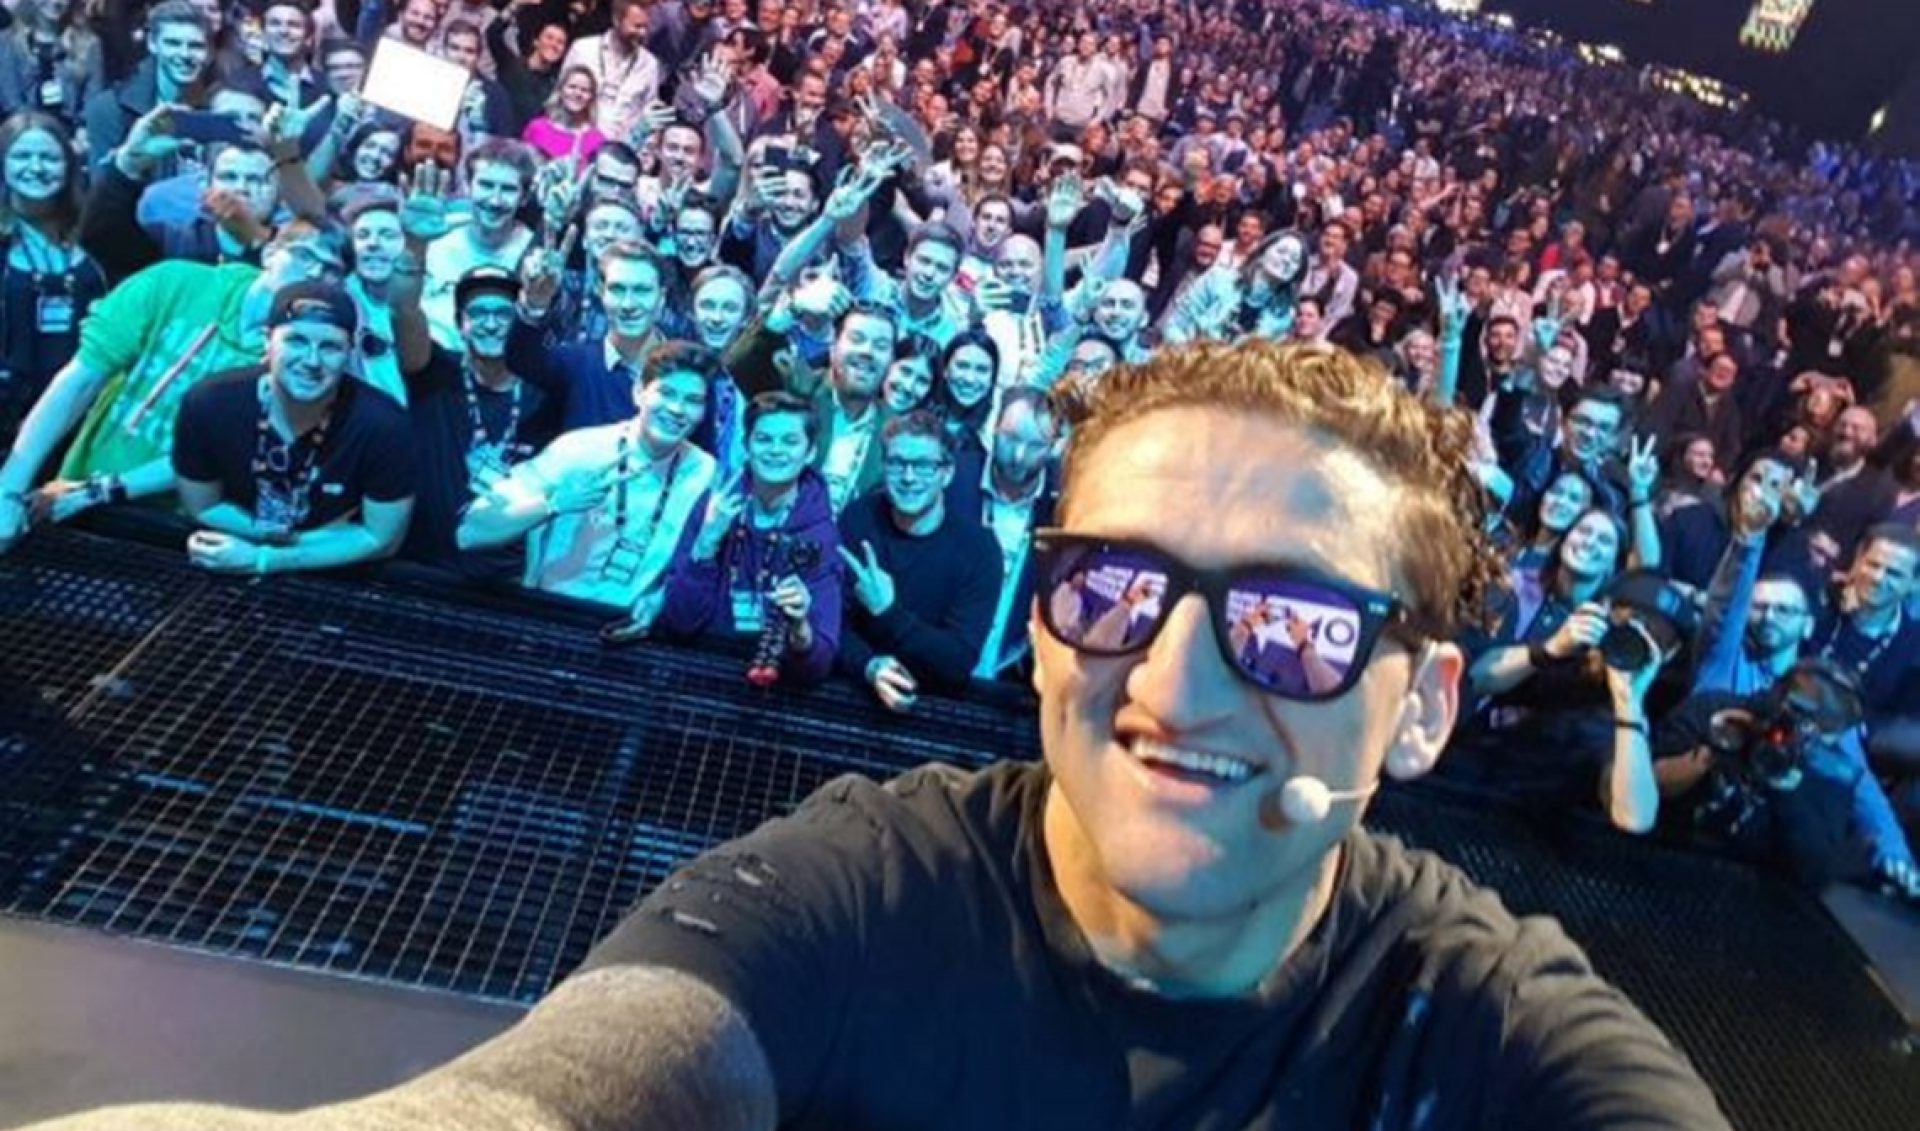 Casey Neistat’s #LoveArmyLasVegas Campaign Raises $200,000 For Shooting Victims